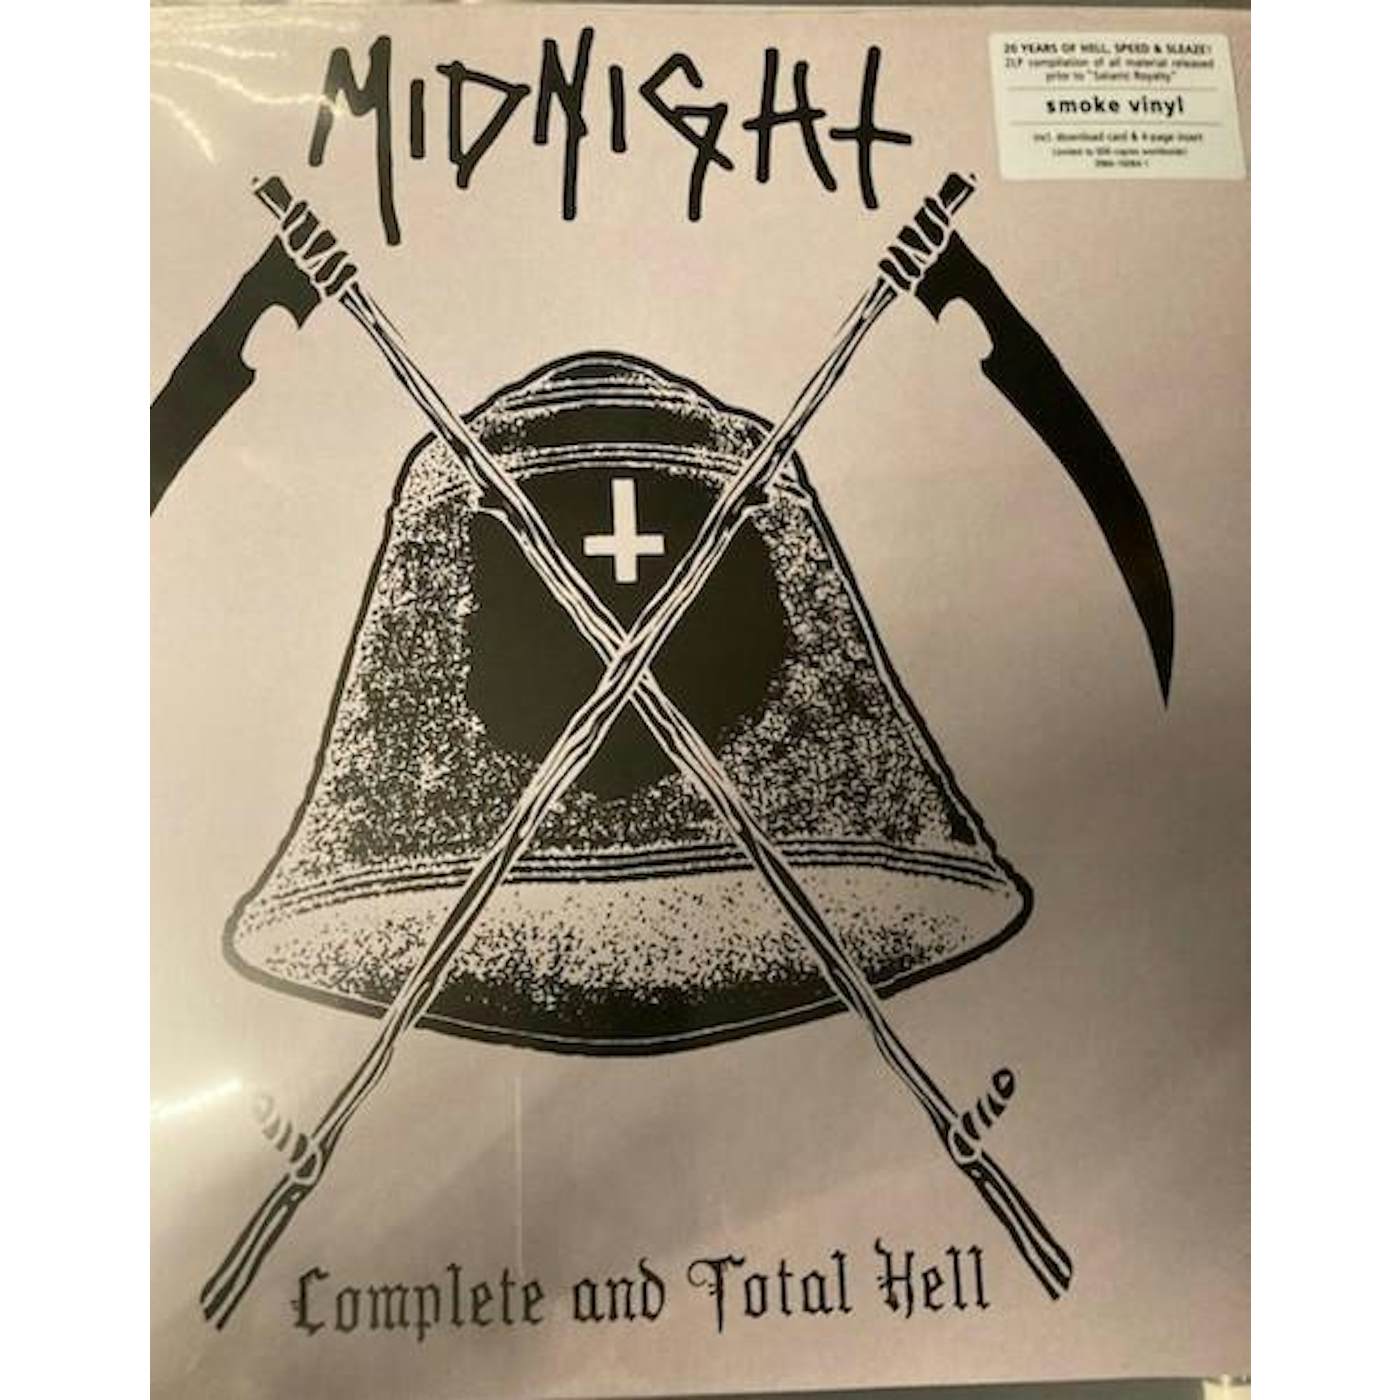 Midnight COMPLETE & TOTAL HELL Vinyl Record